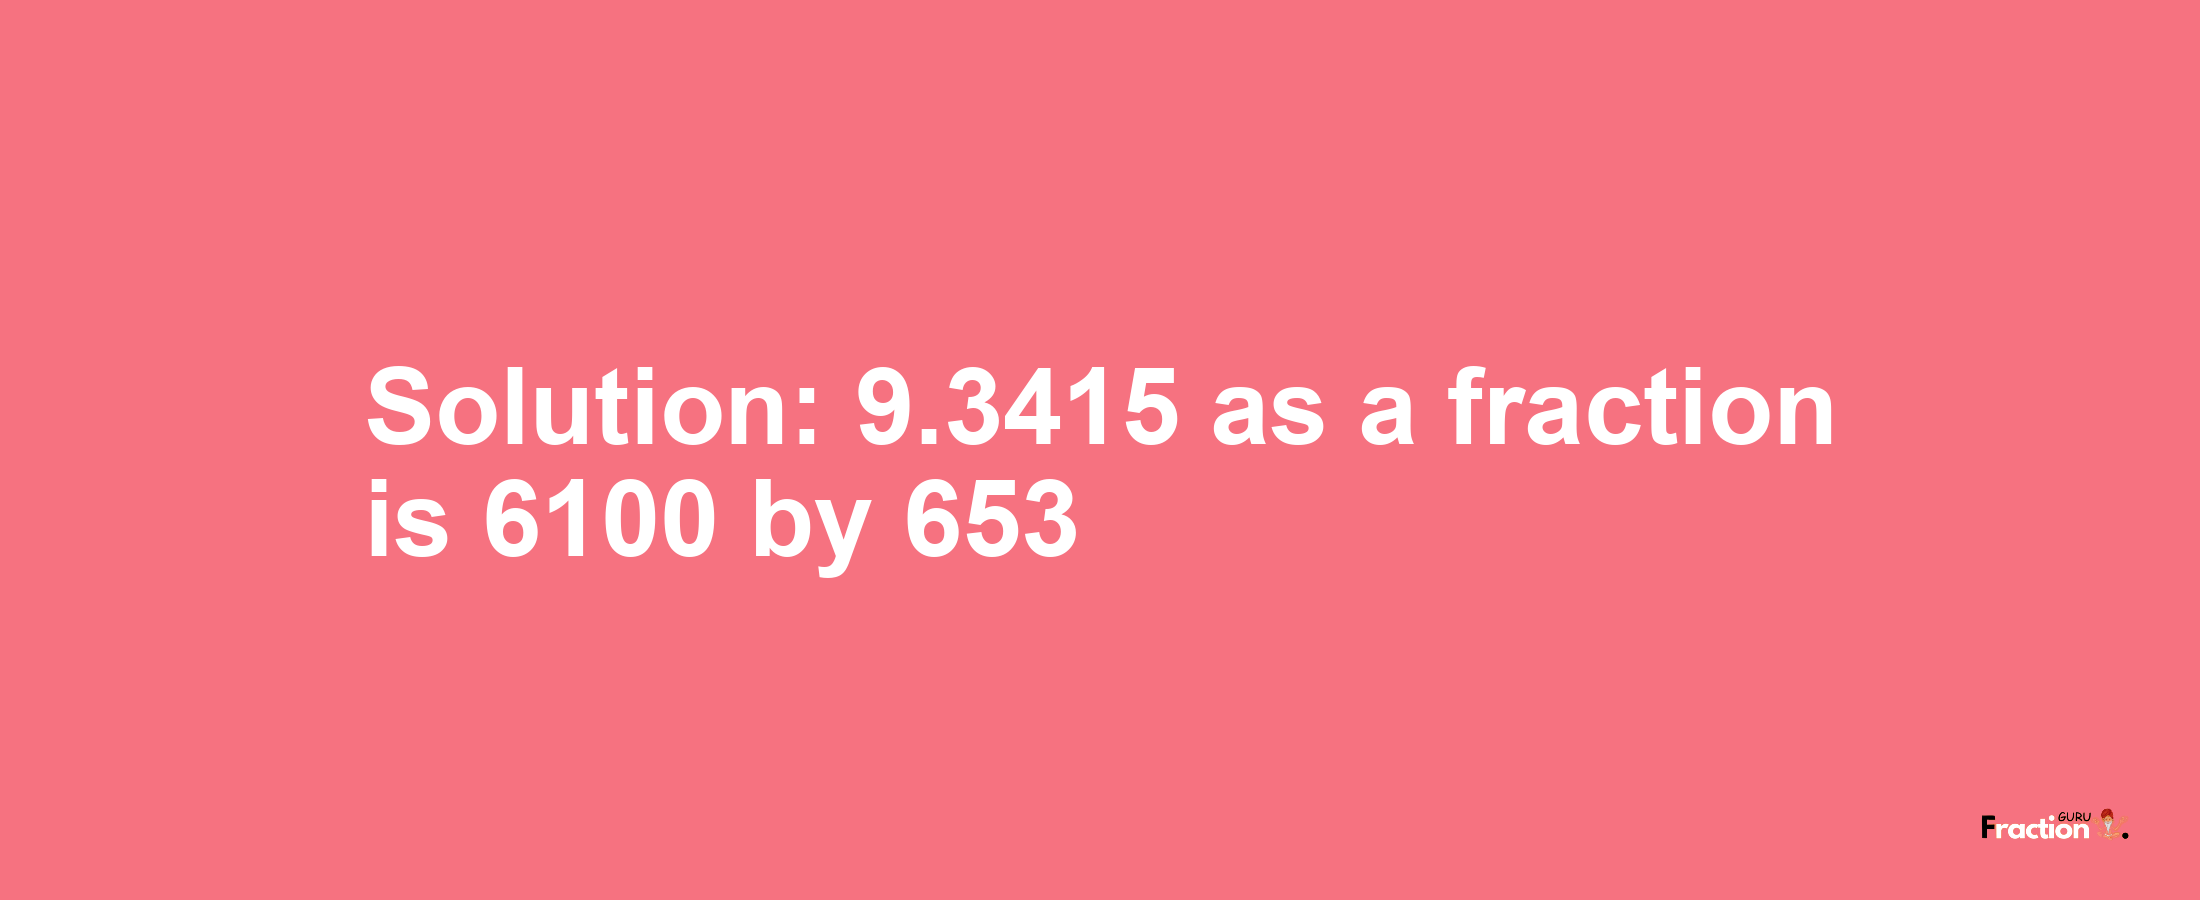 Solution:9.3415 as a fraction is 6100/653